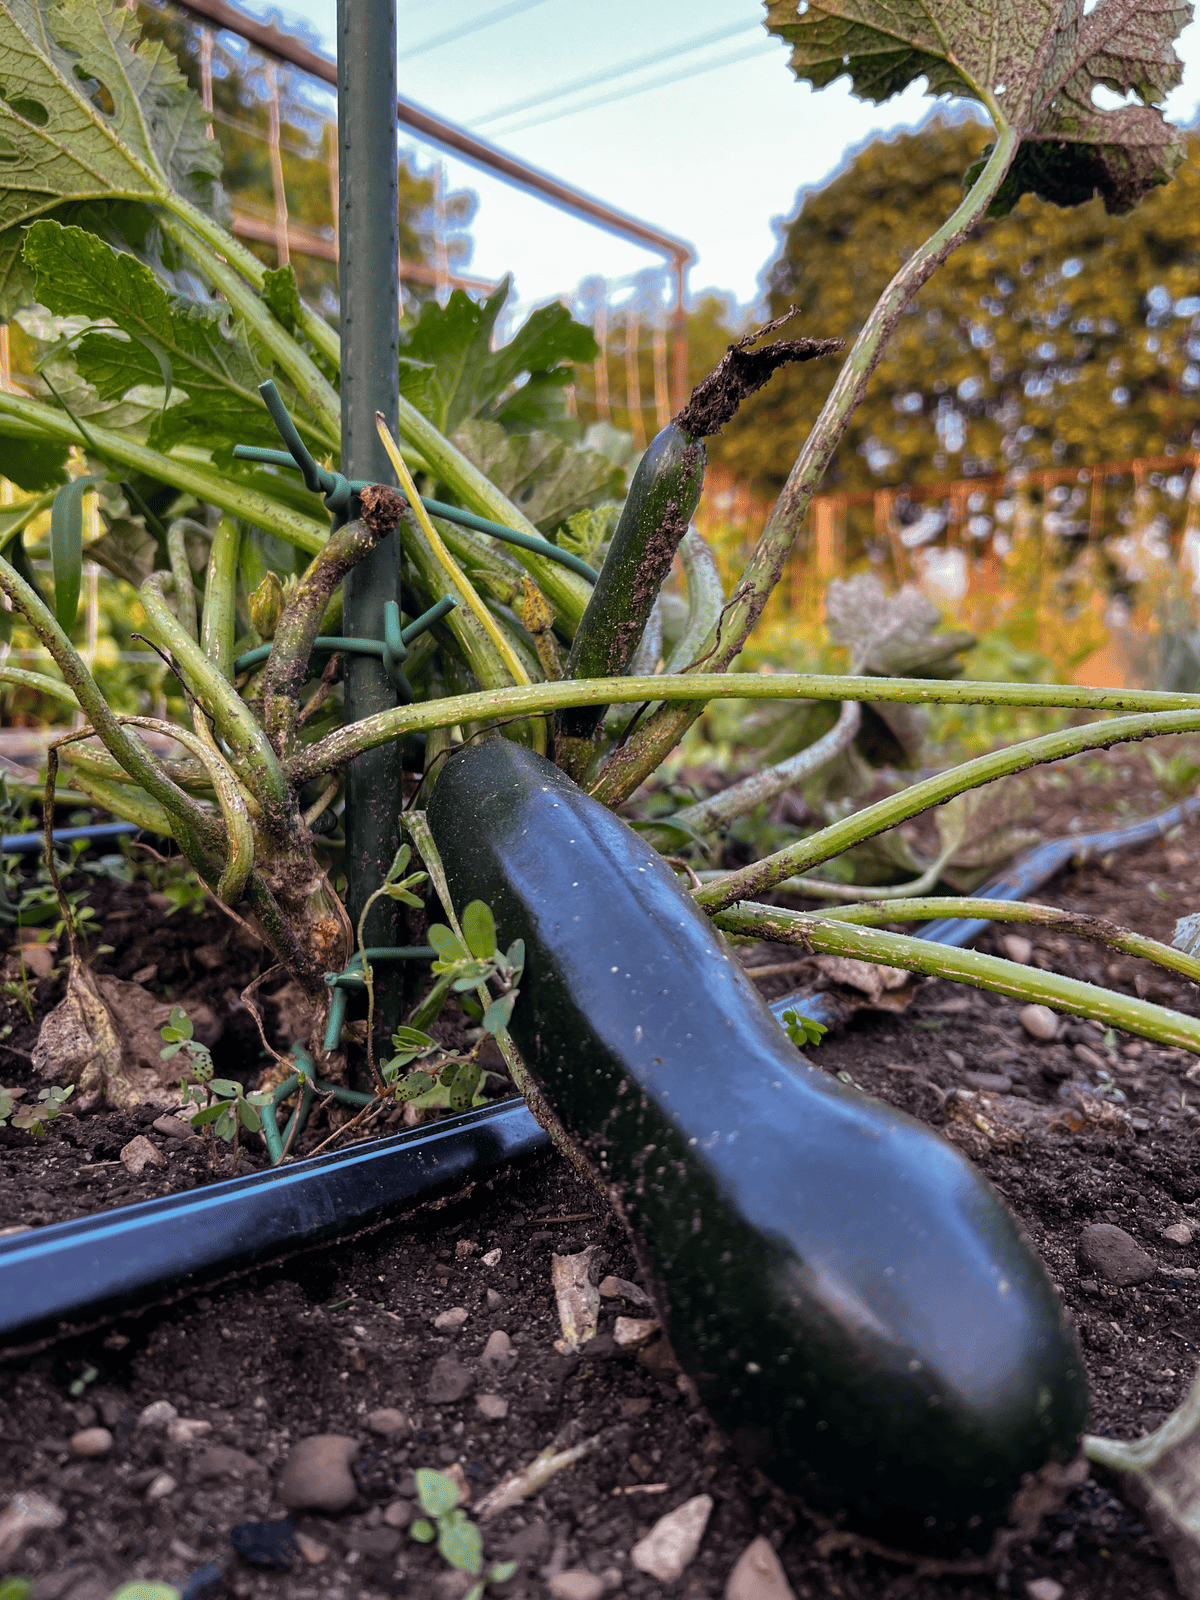 Zucchini growing on plant in the garden.